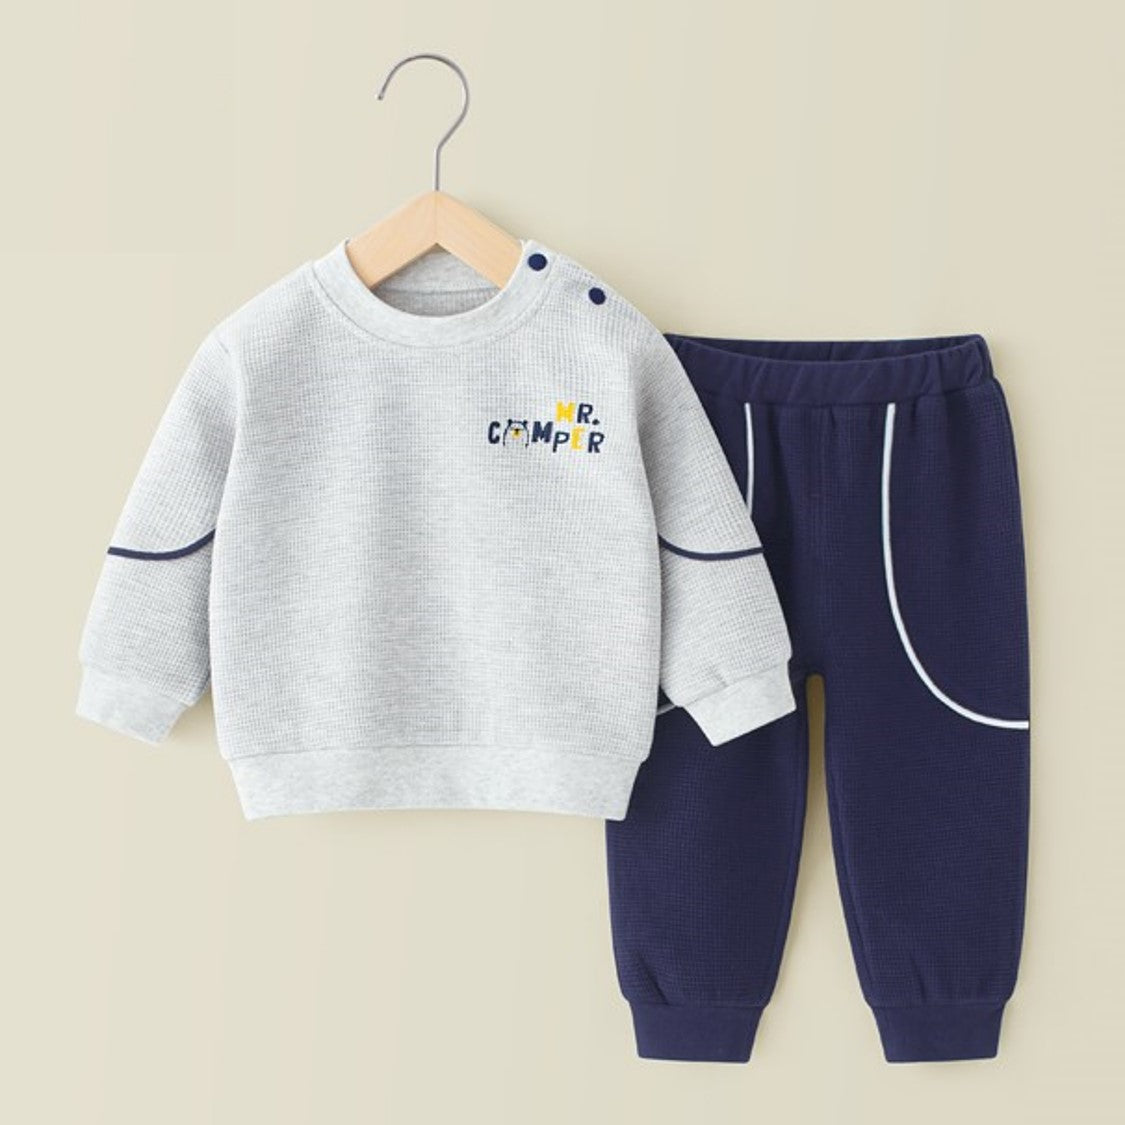 Bubs n Kids Little Camper Top and Pants Set Review